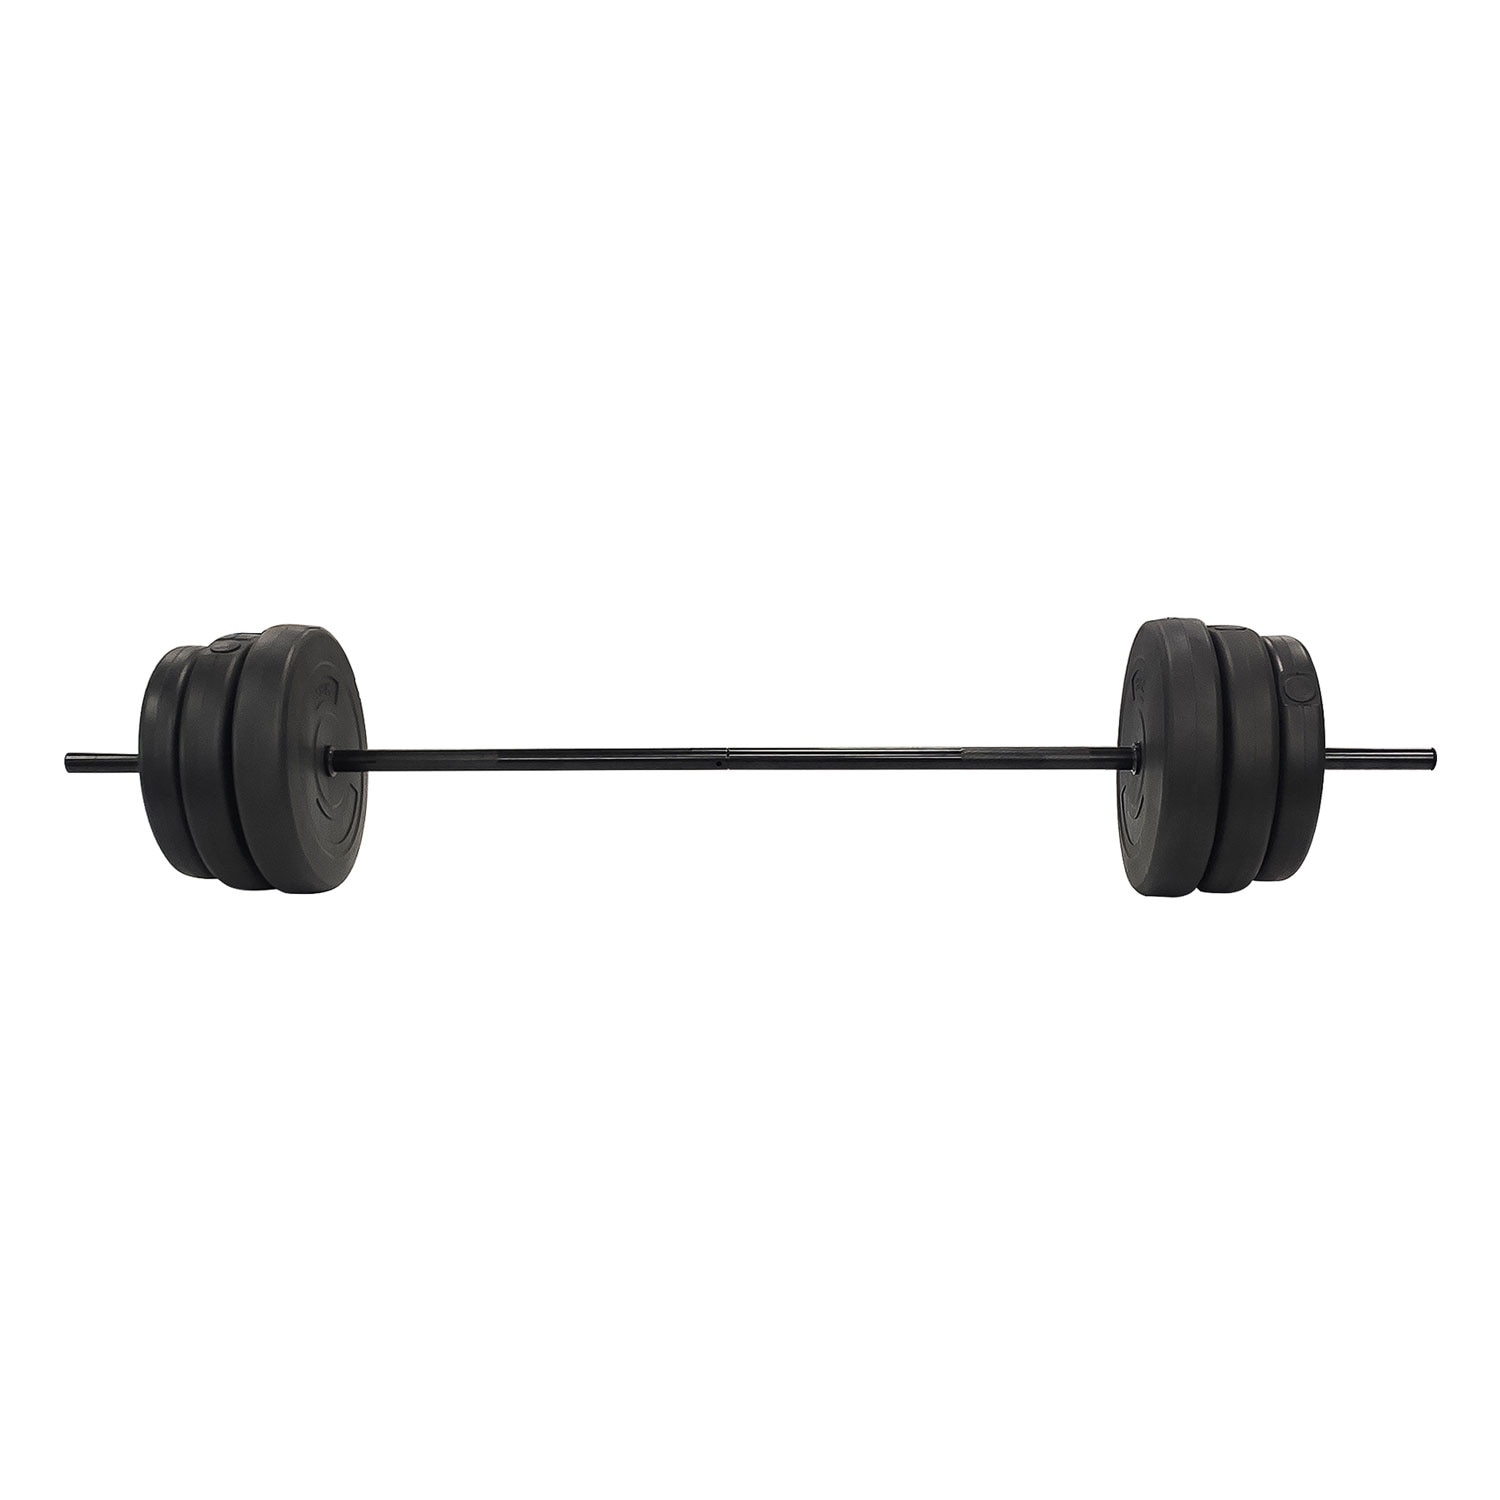  AboveGenius Barbell Weight Set for Lifting, 45 Lb Weight Bar  Set with Adjustable Free Weights for Workout Bar for Home Gym(Black) :  Sports & Outdoors